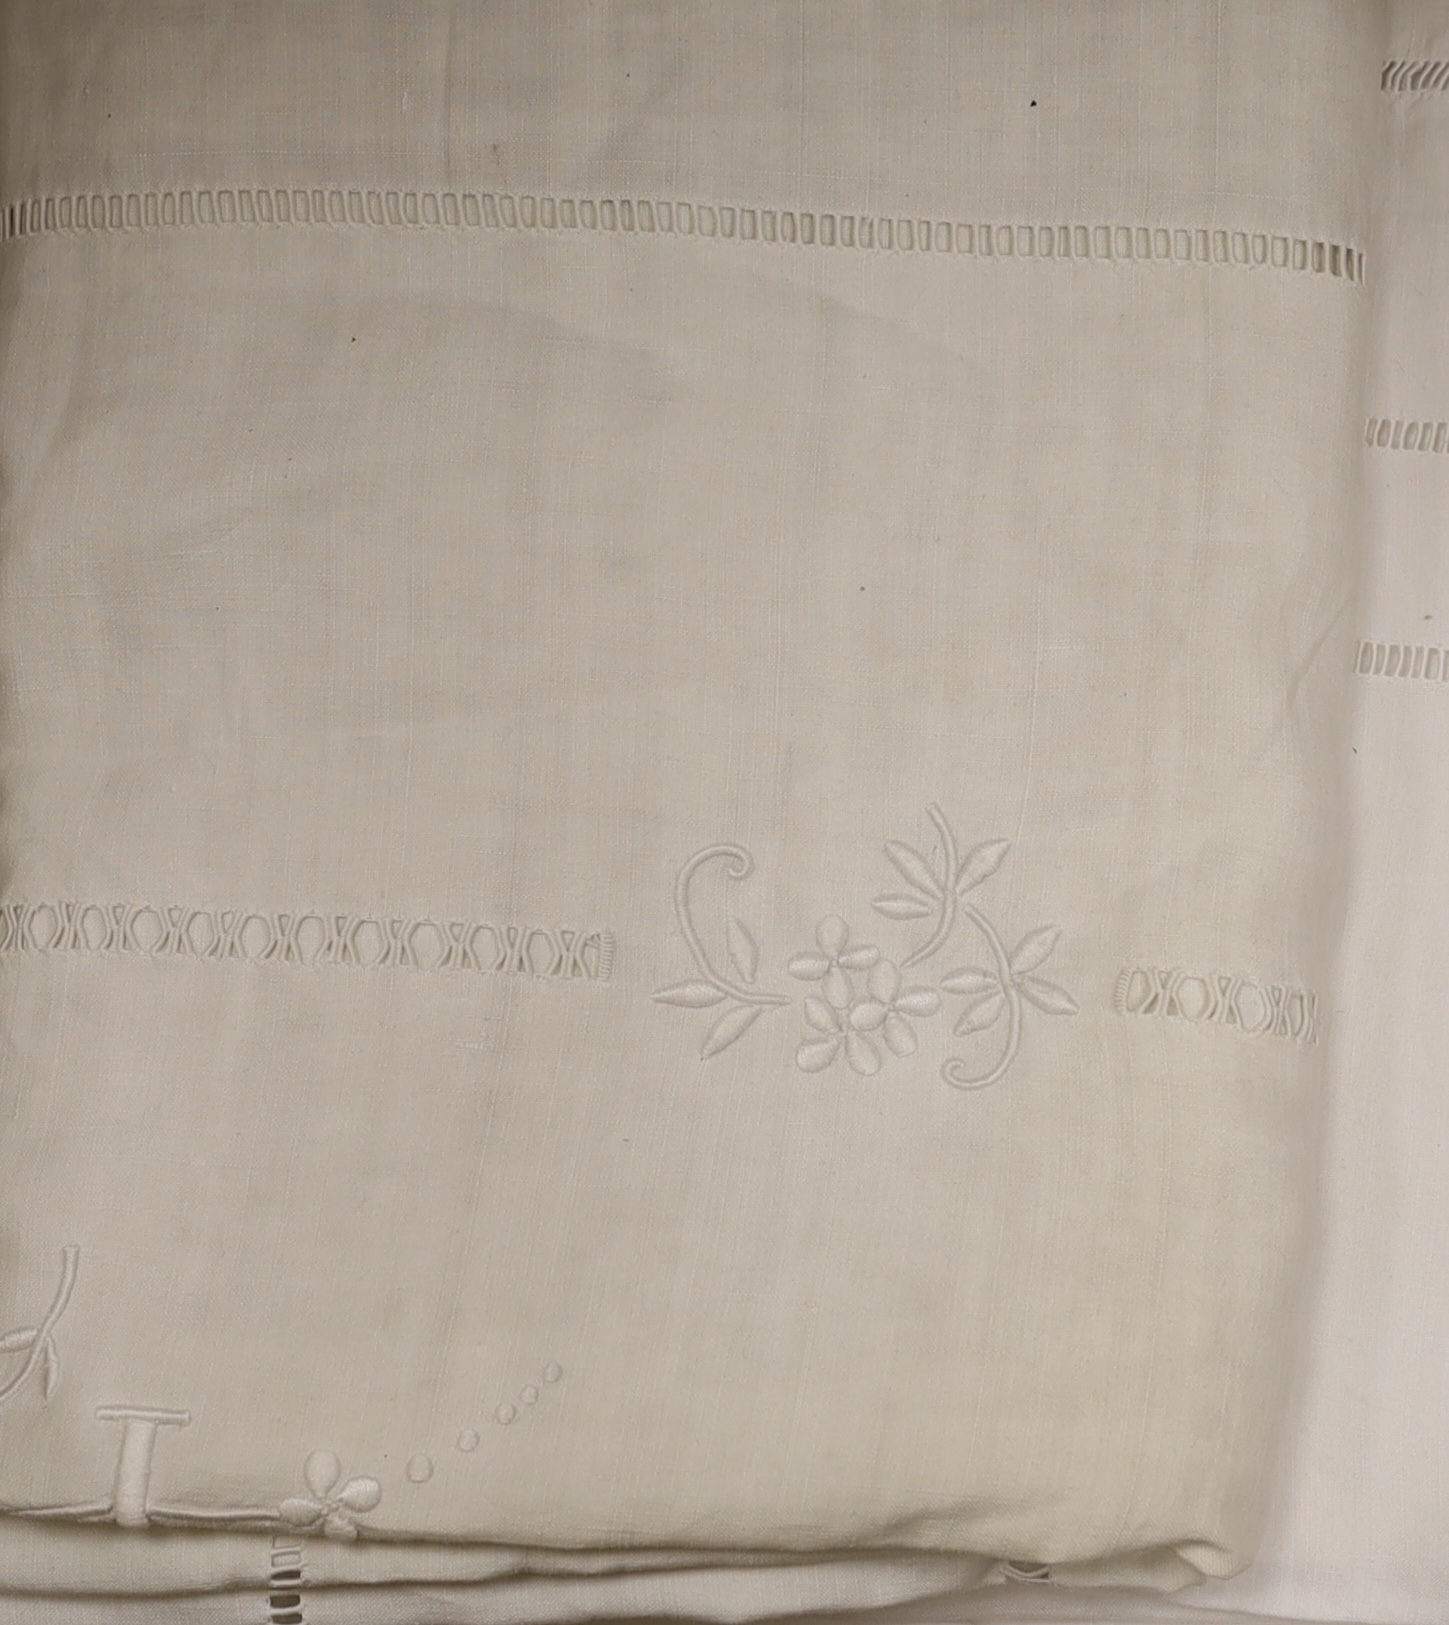 A crochet and monogrammed sheet, a lace inserted and monogrammed sheet, two embroidered and monogrammed sheets (4)